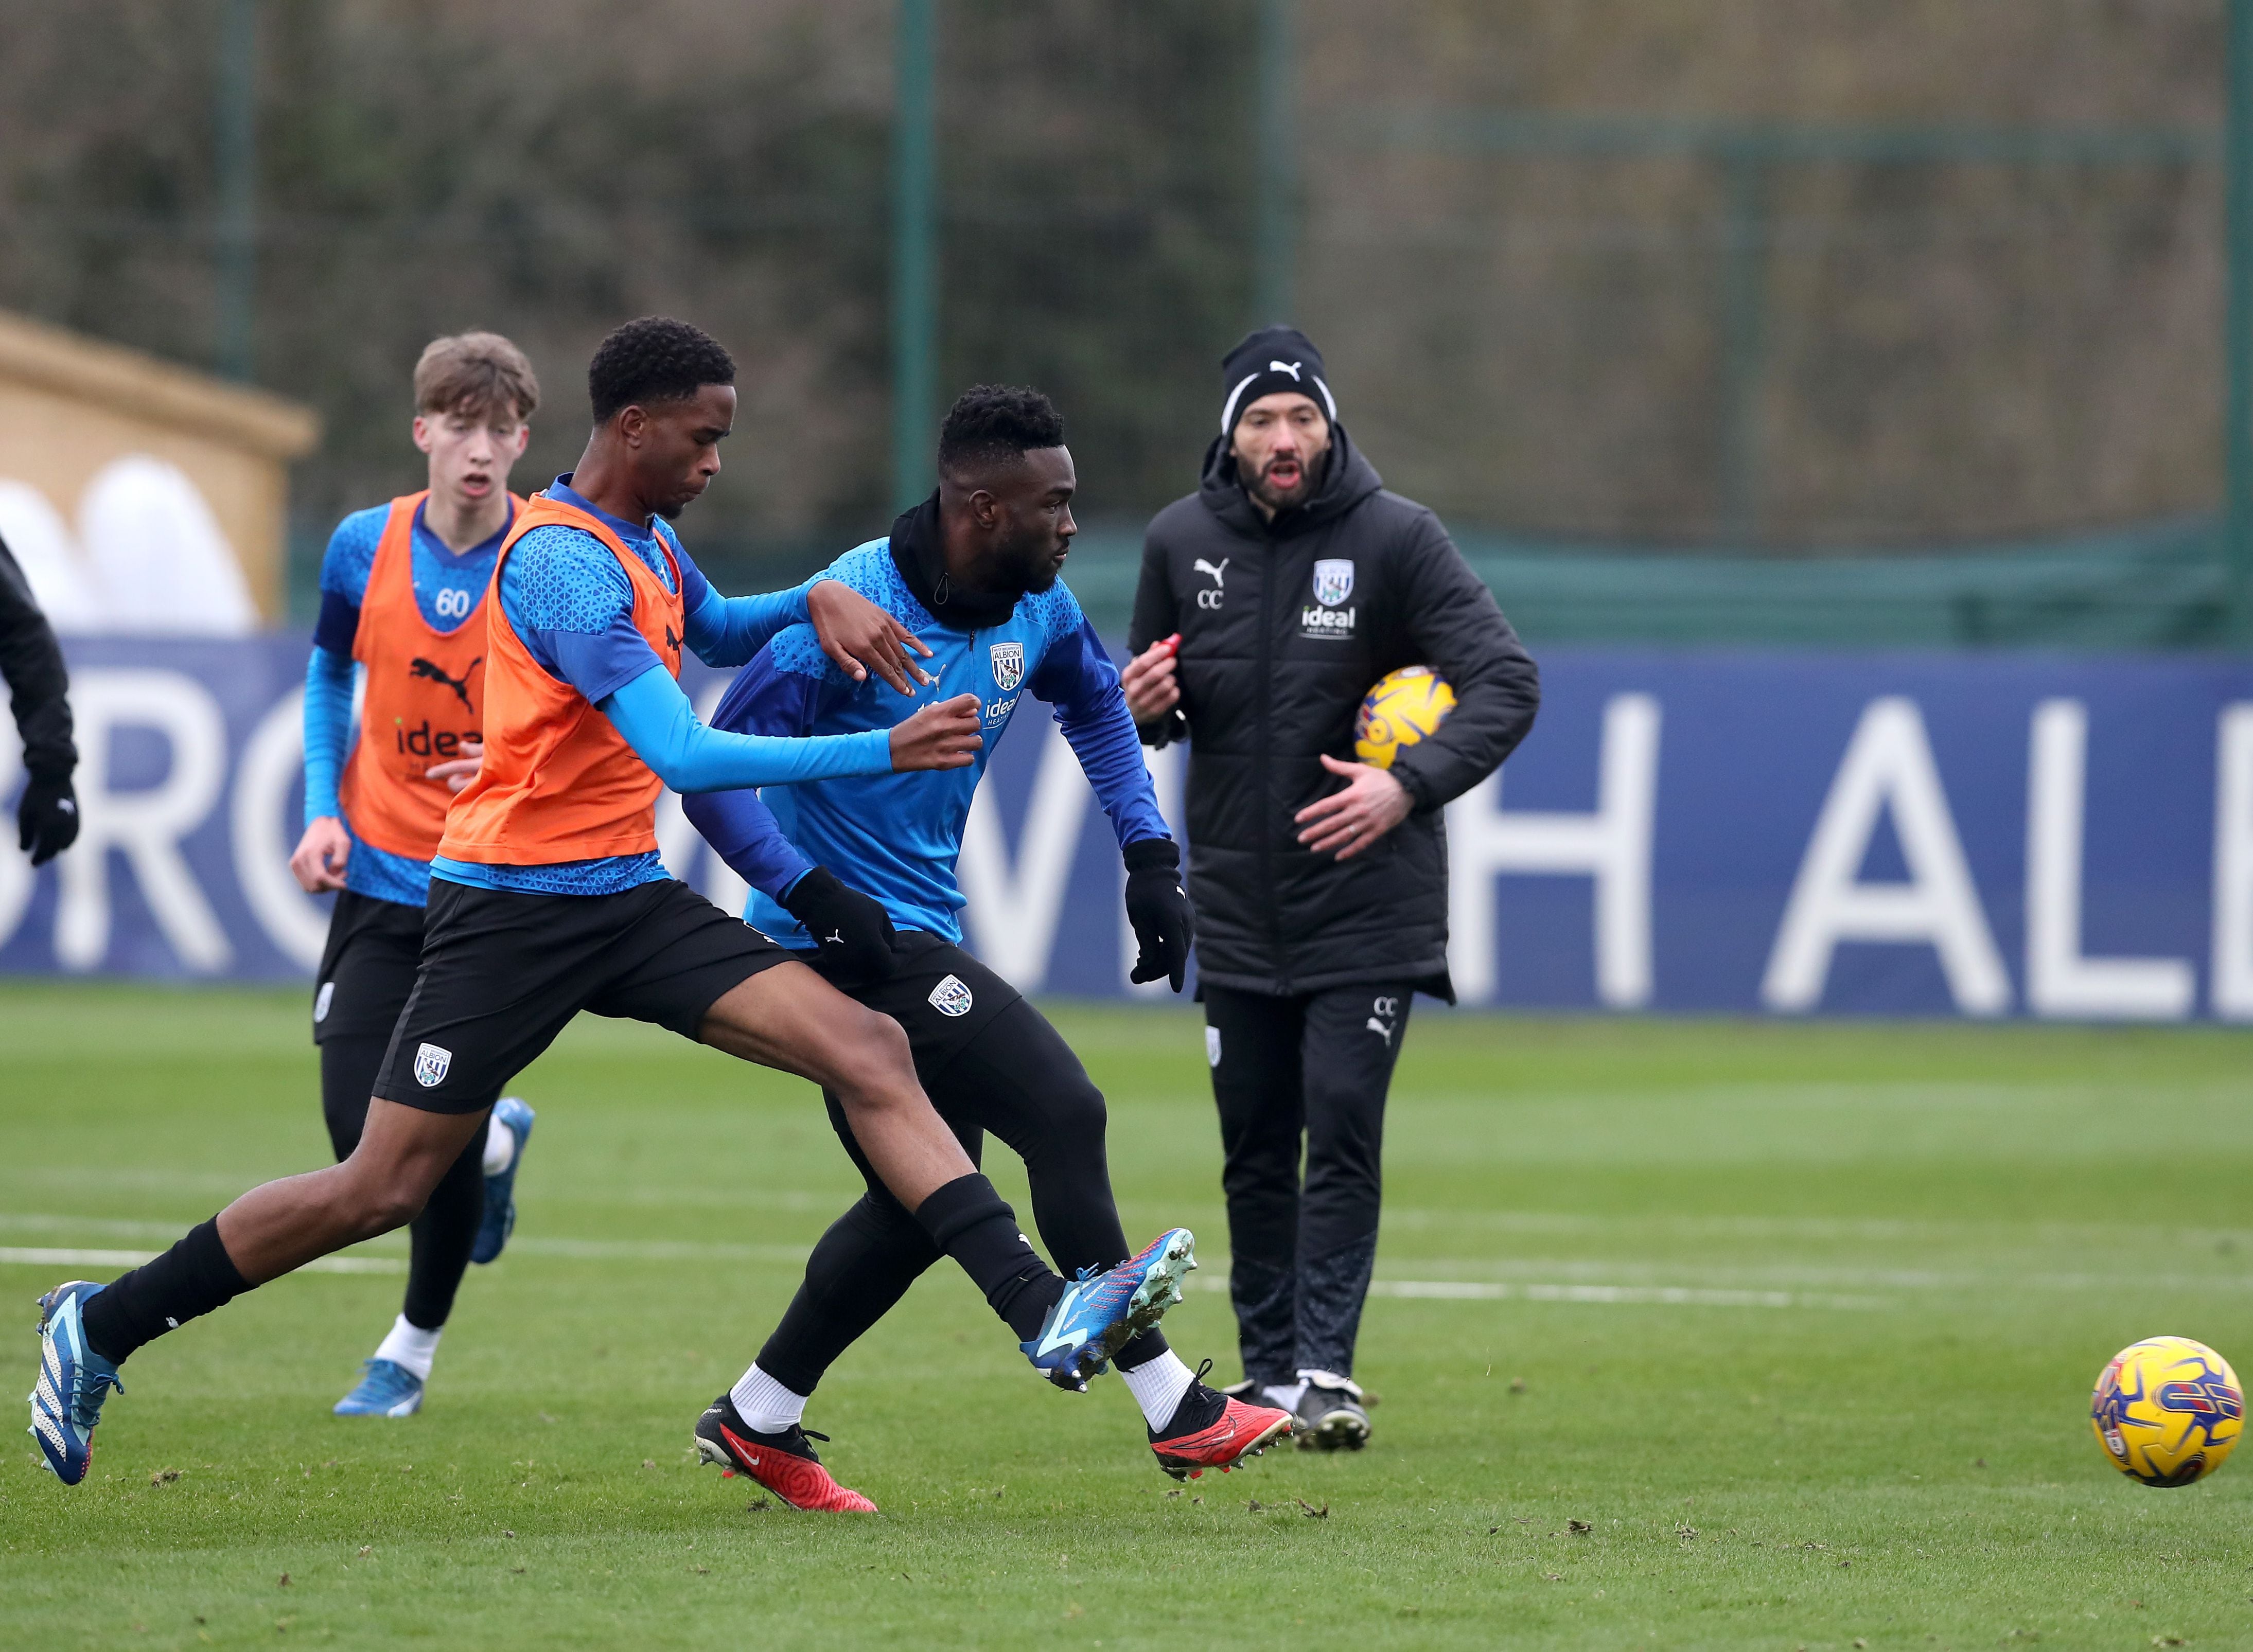 Gallery: West Brom prepare for return to league action against Blackburn